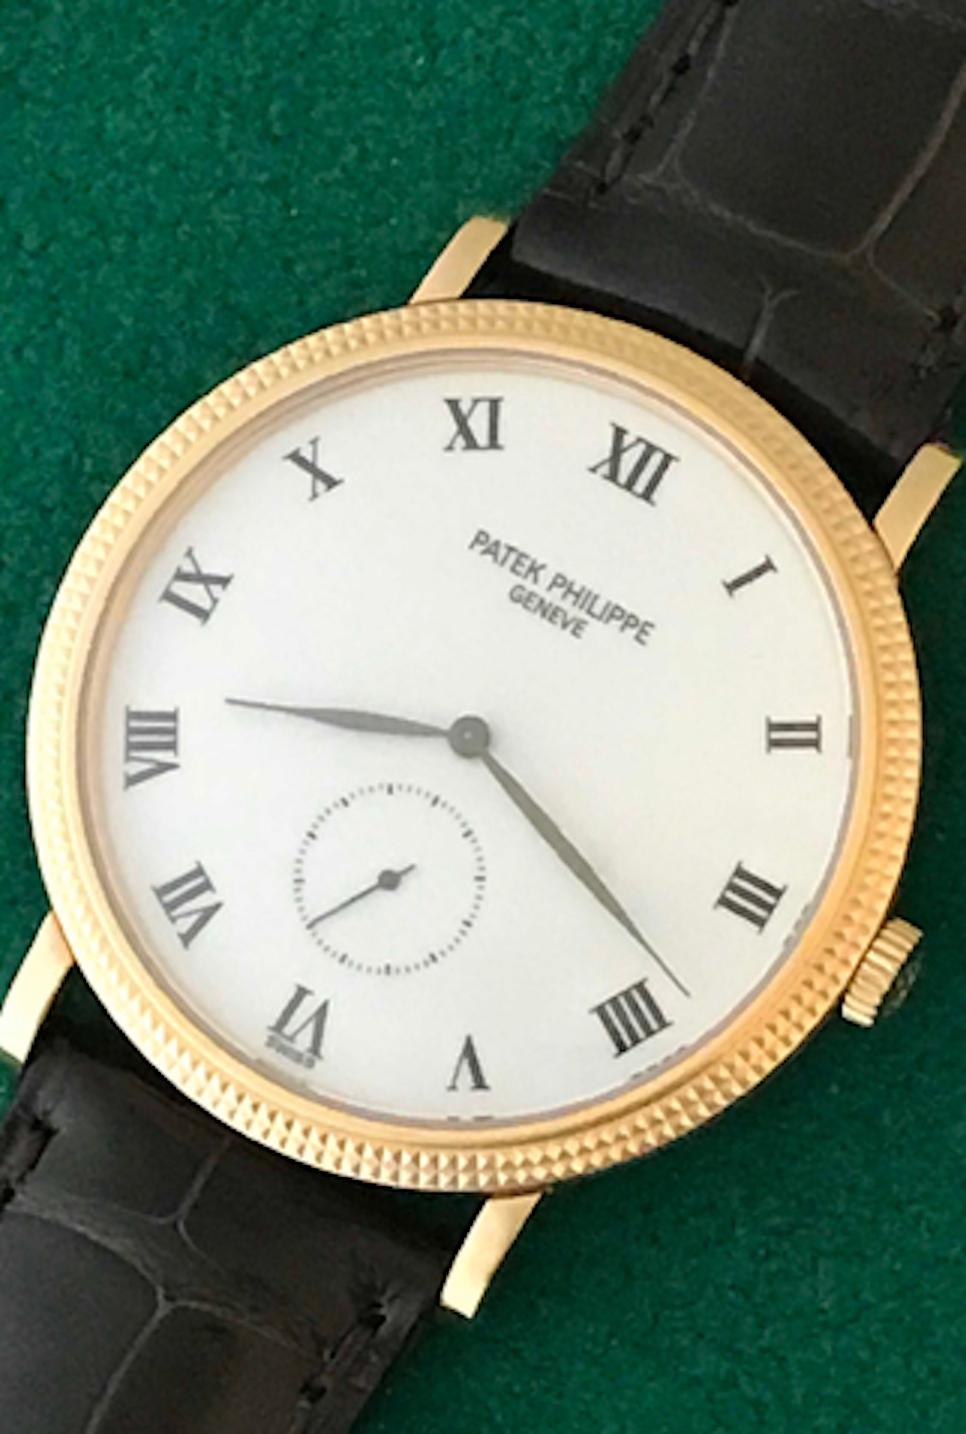 The Patek Philippe Calatrava Ref 3919R Certified pre-owned men's wrist watch. Features the Patek Philippe Caliber 215 with eighteen (18) jewels and classic white dial with black Roman numerals. 18k Rose Gold Patek Philippe case with hobnail bezel.